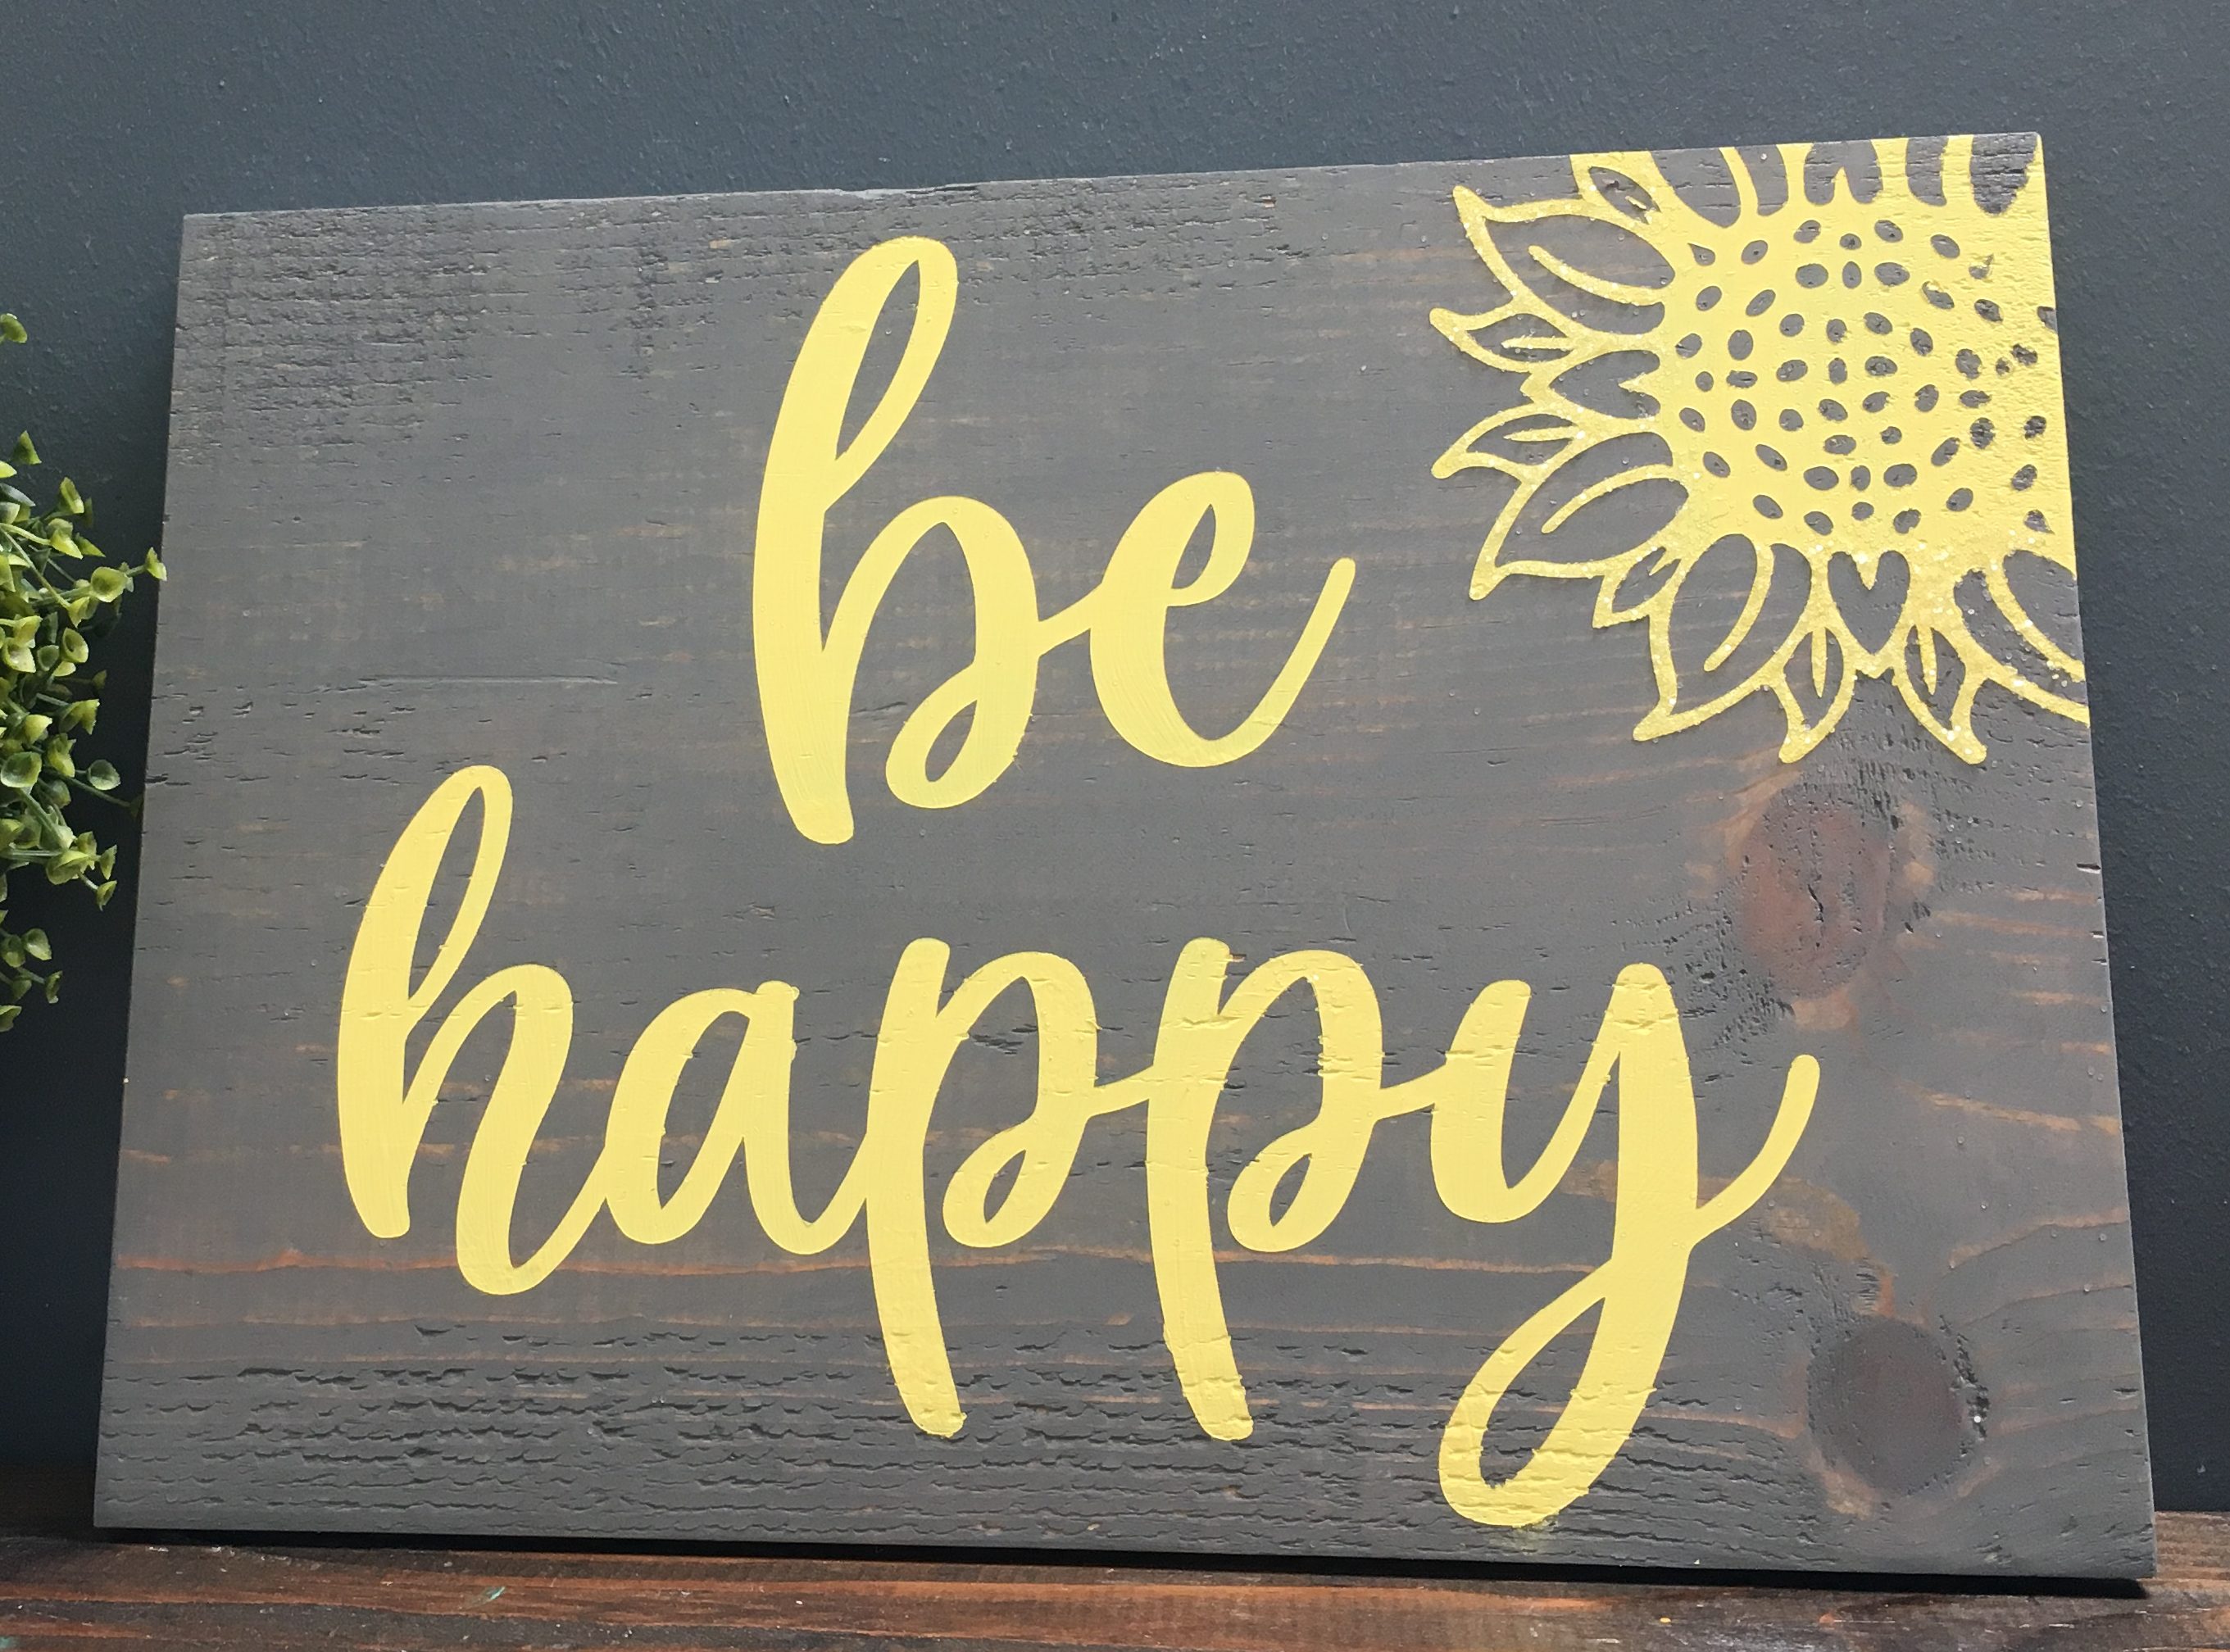 Wood sign that says be happy